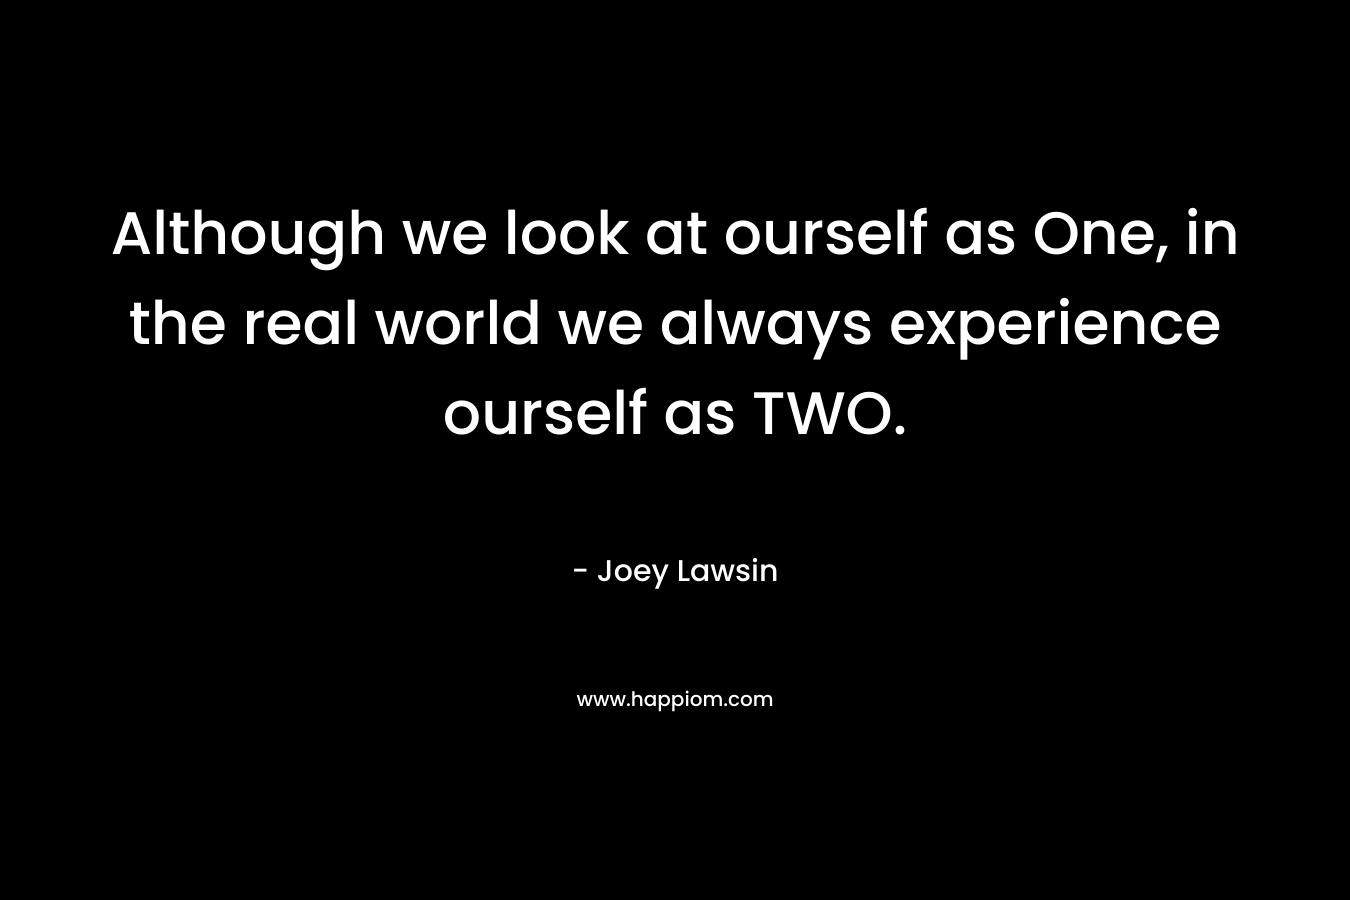 Although we look at ourself as One, in the real world we always experience ourself as TWO.